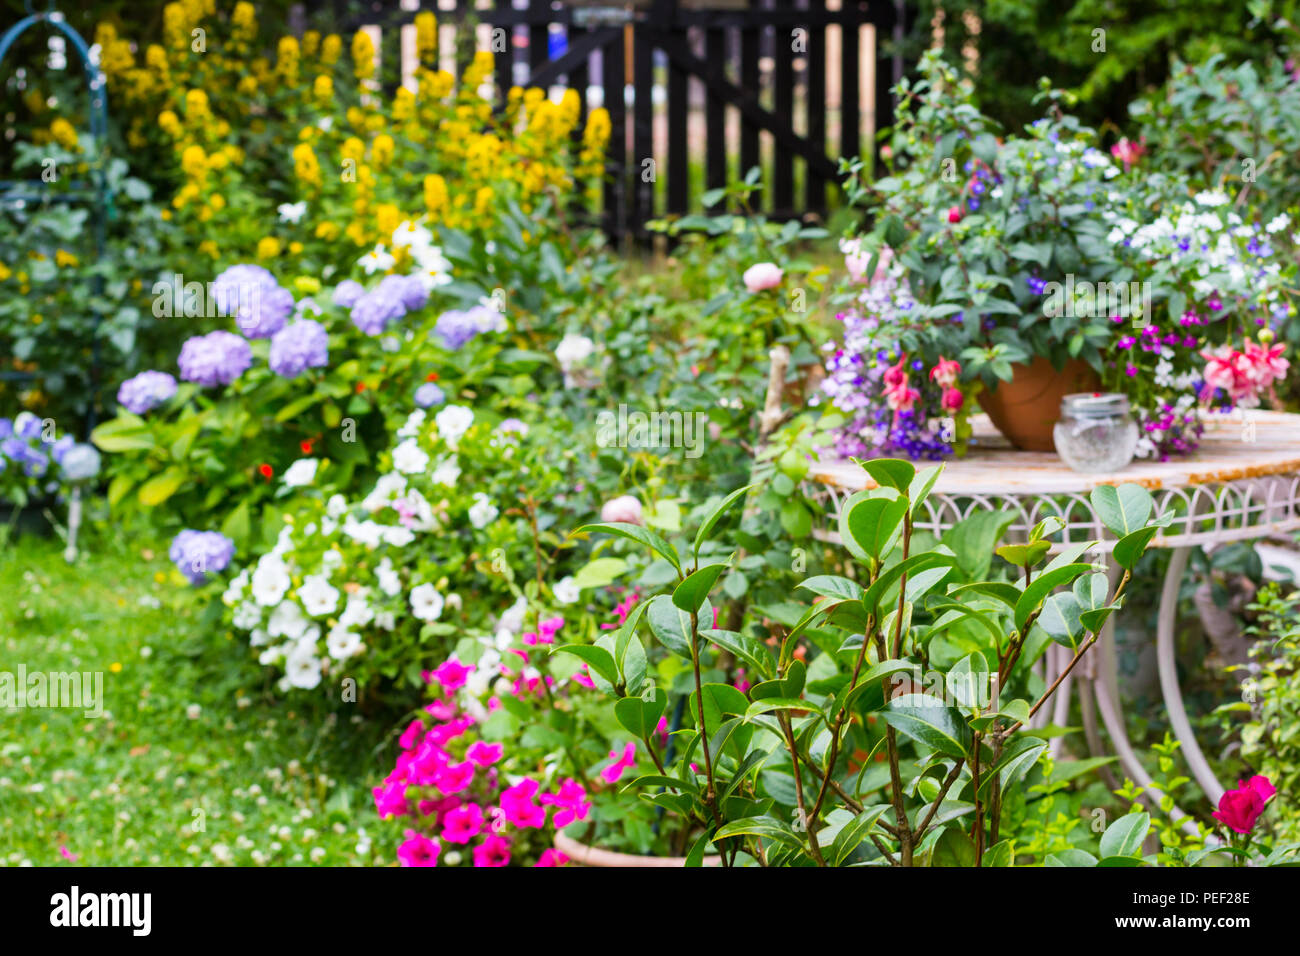 beautiful home garden with lots of blooming flowers, plants and